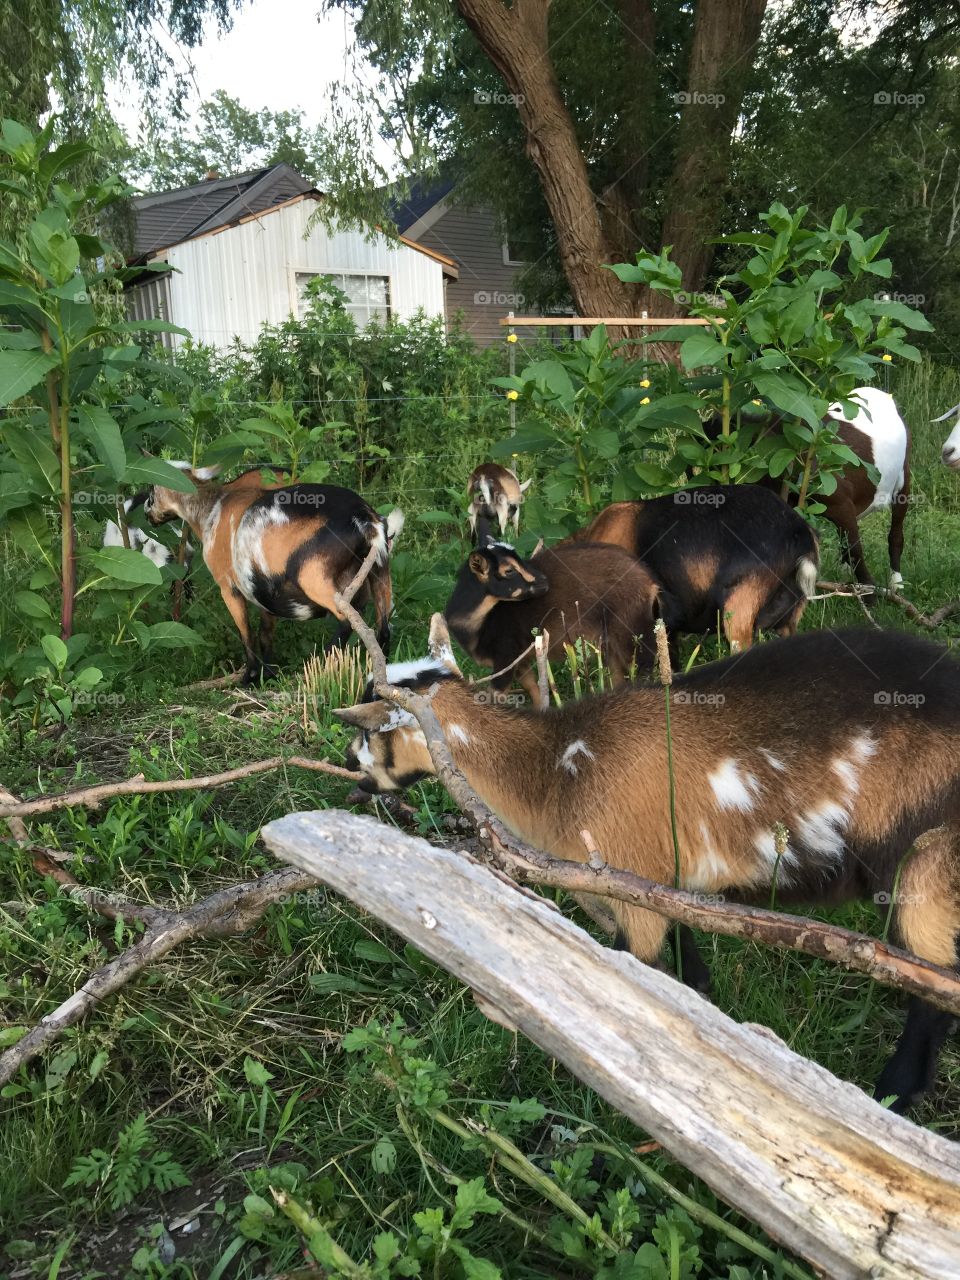 Goat lunch time